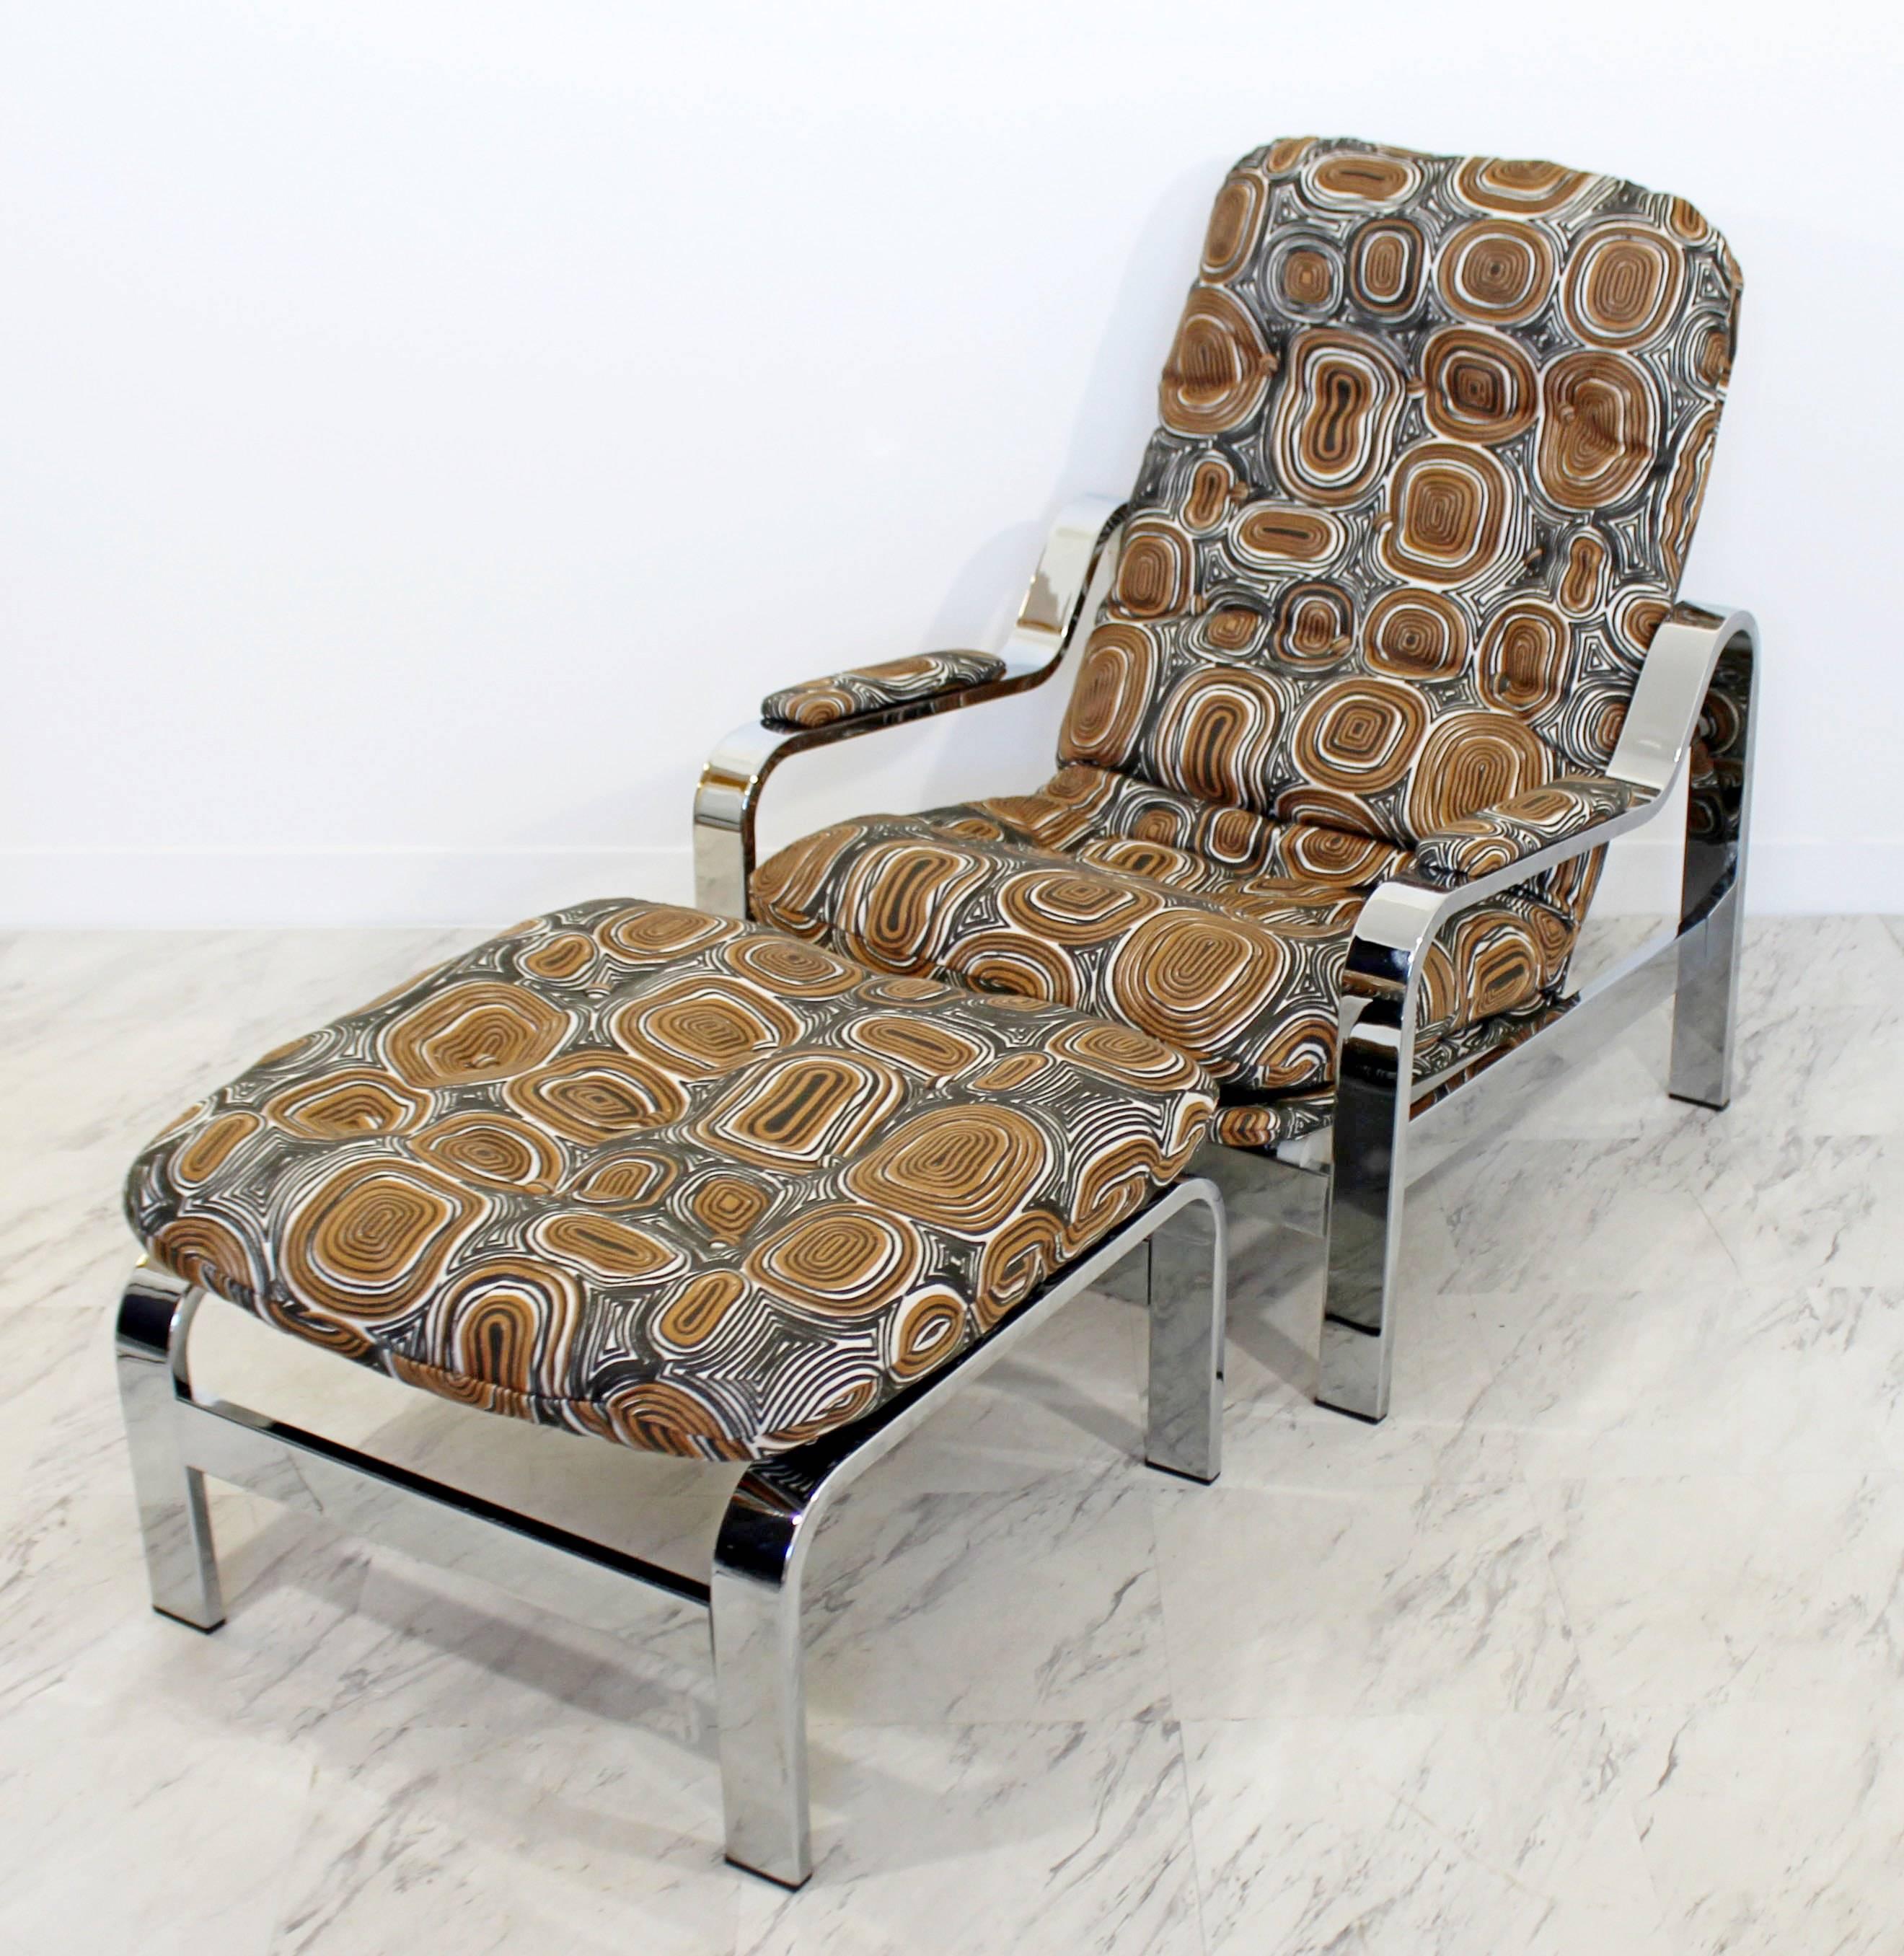 For your consideration is a magnificent reclining lounge chair and matching ottoman, on thick polished steel chrome bases, Milo Baughman for Selig, made in Italy, circa 1970s. In excellent condition. Just back from being professionally reupholstered